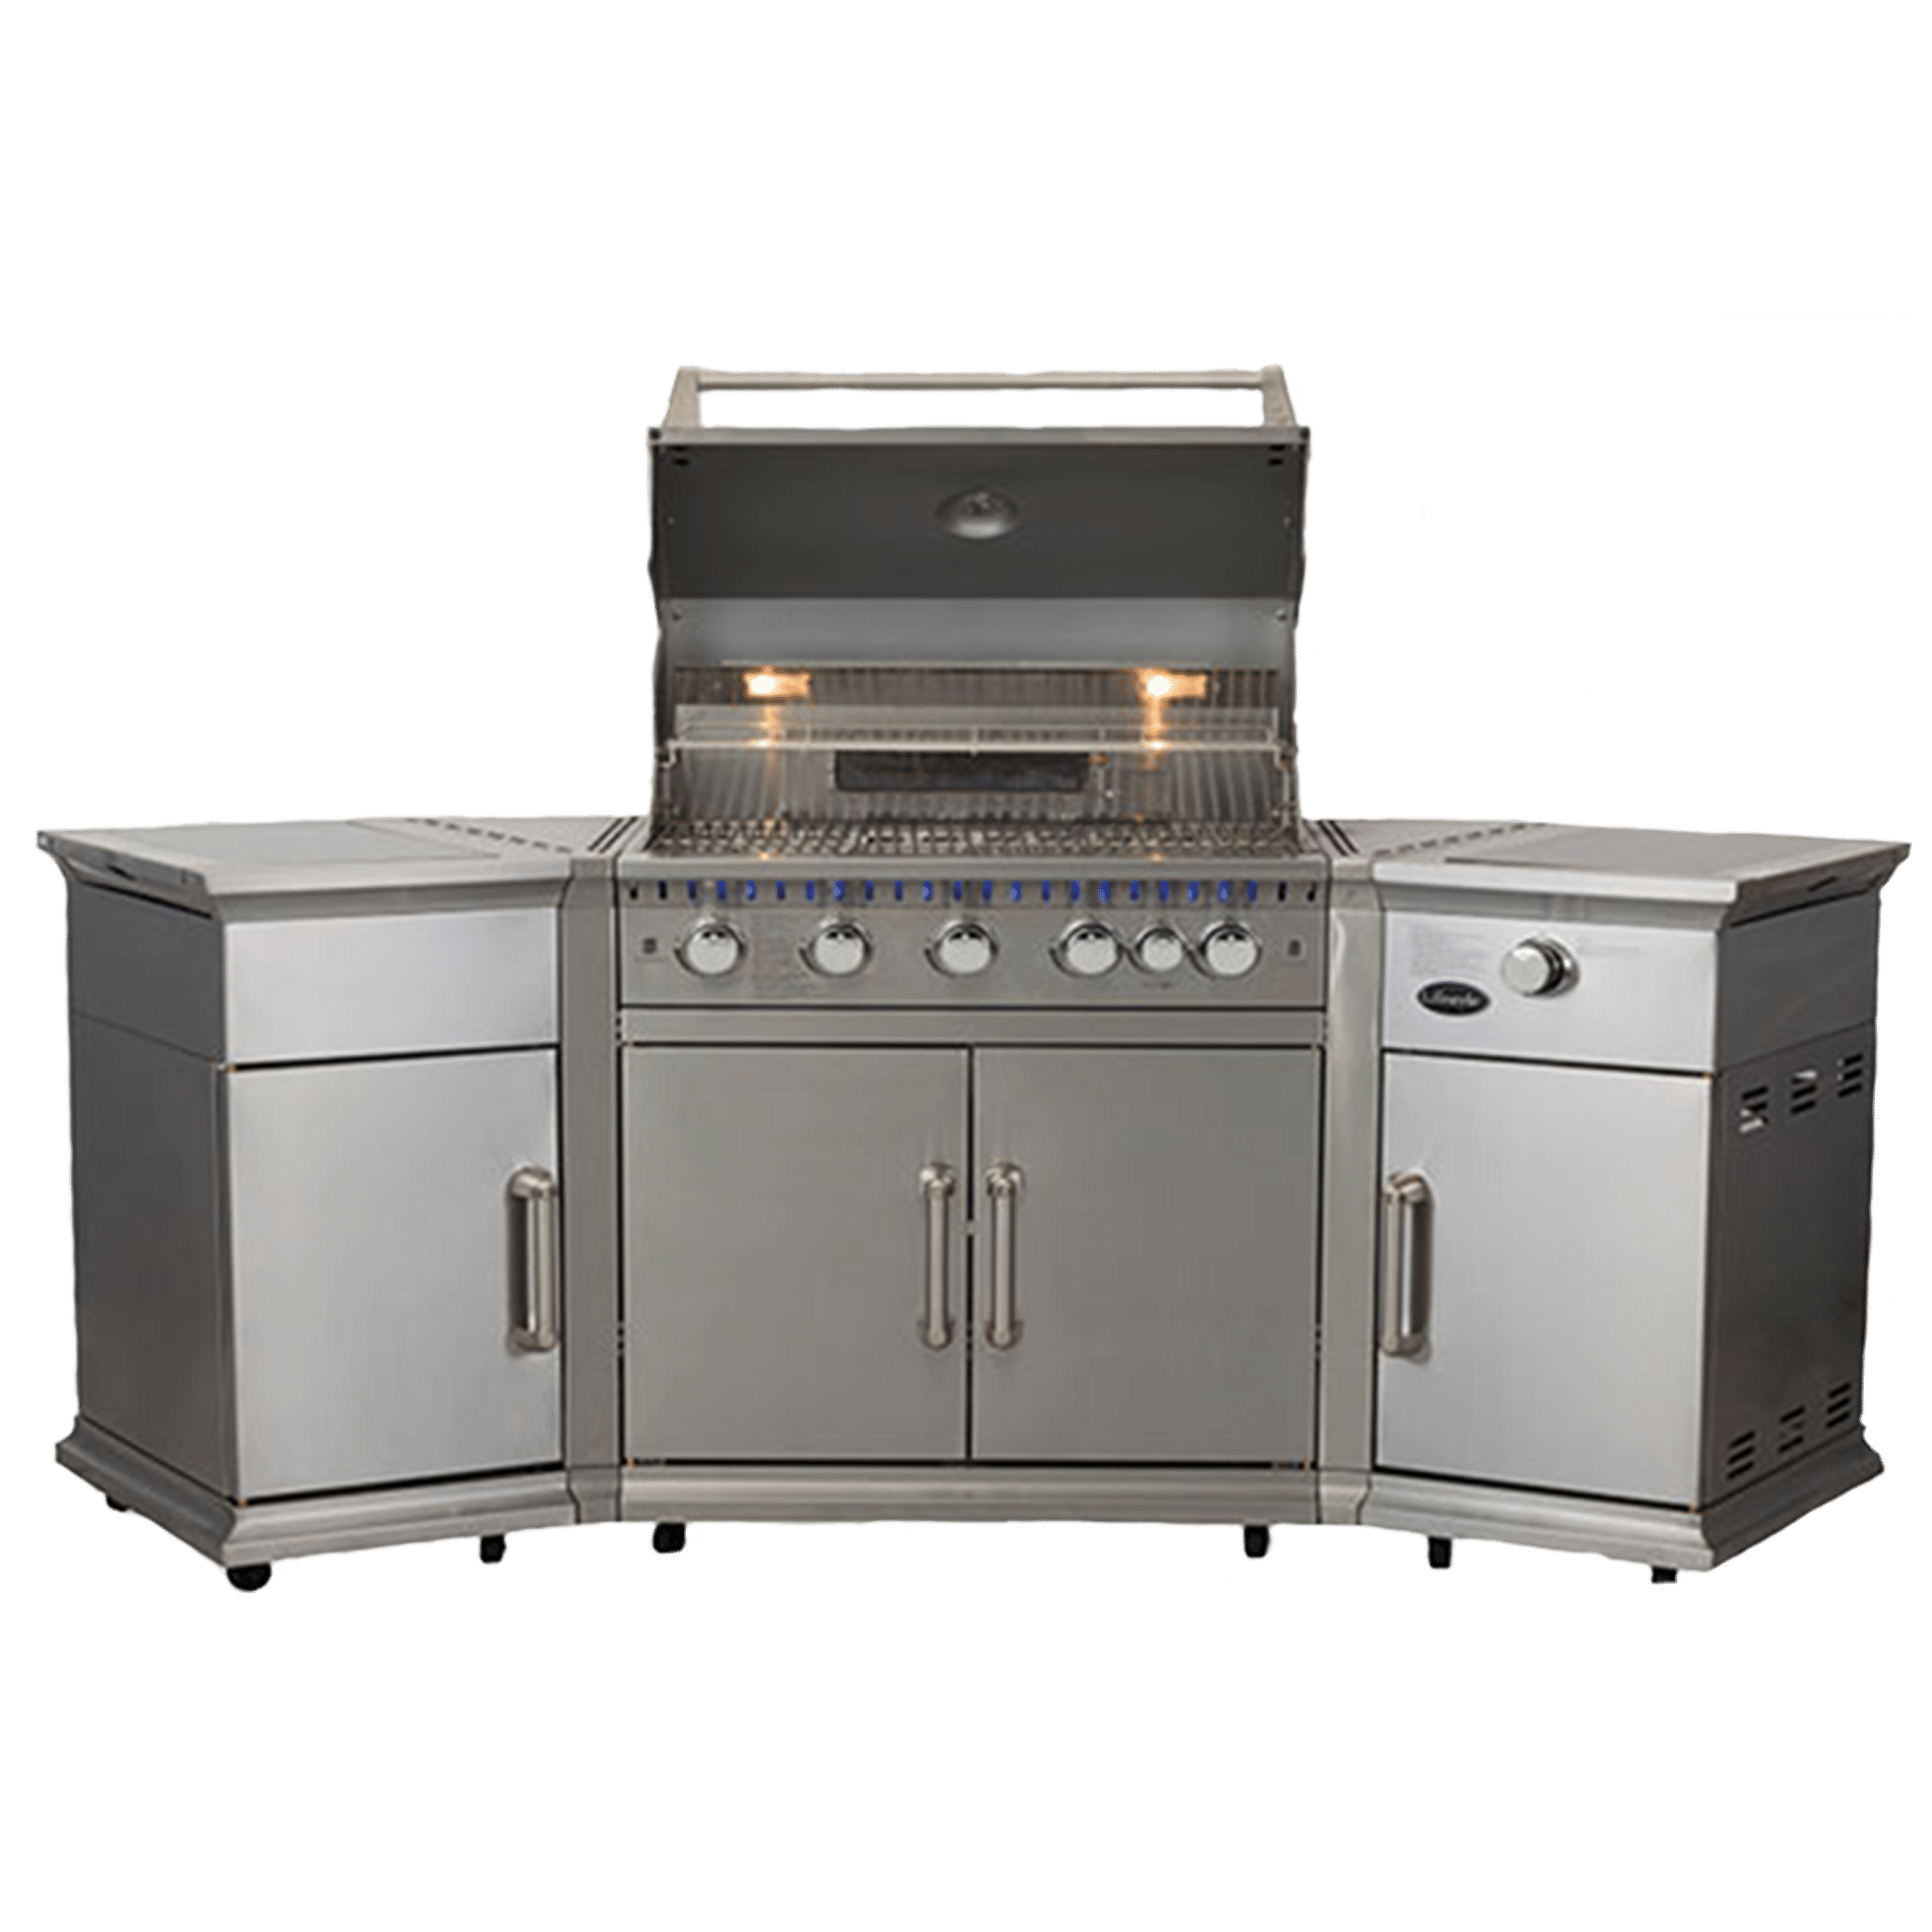 Lifestyle Bahama Island stainless steel BBQ/barbecue